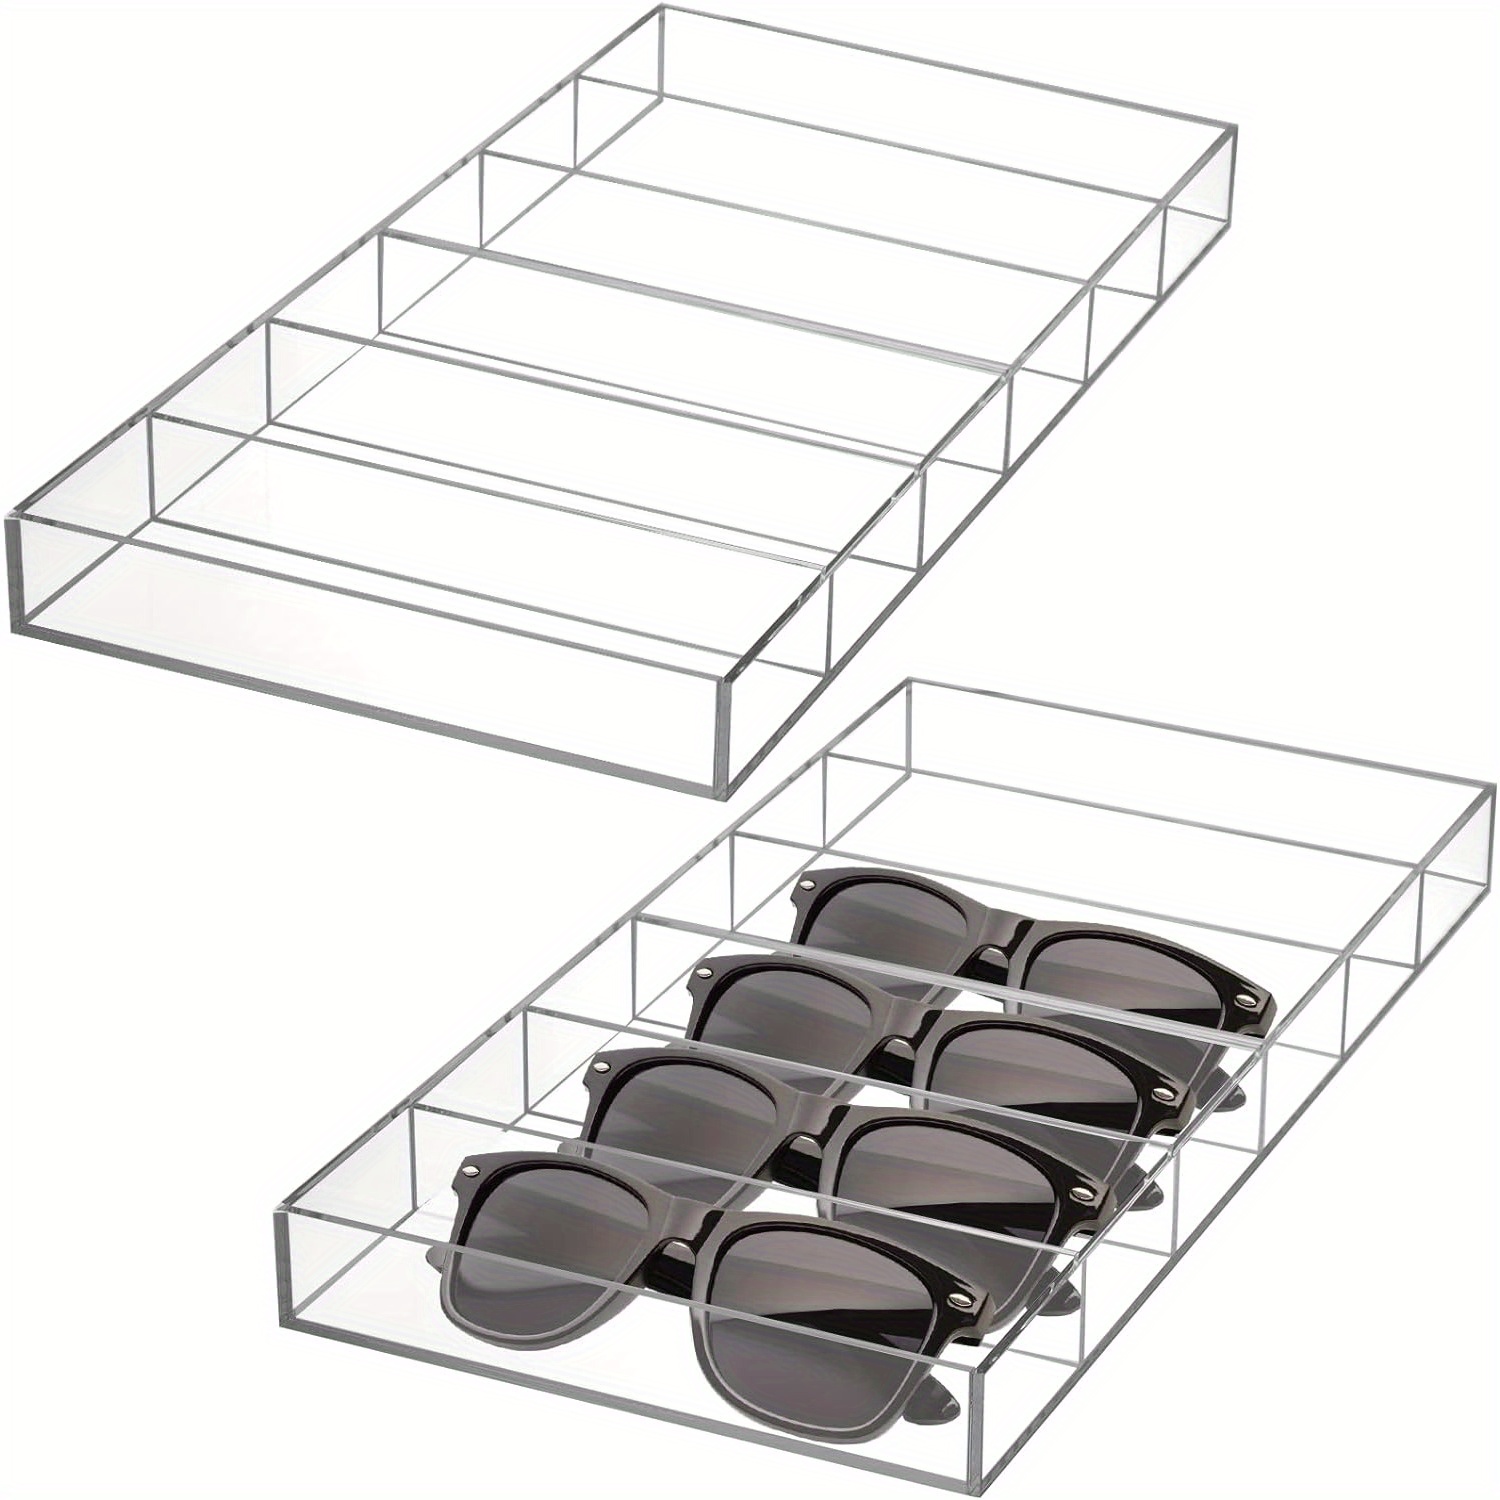 

1pc Acrylic Sunglasses Organizer, 6 Slots Clear Eyeglasses Storage Tray, Stackable Eyewear Display Tray For Sunglasses, Fashion Eye Wear Holder, Protective Glasses Container, Bedroom Accessories